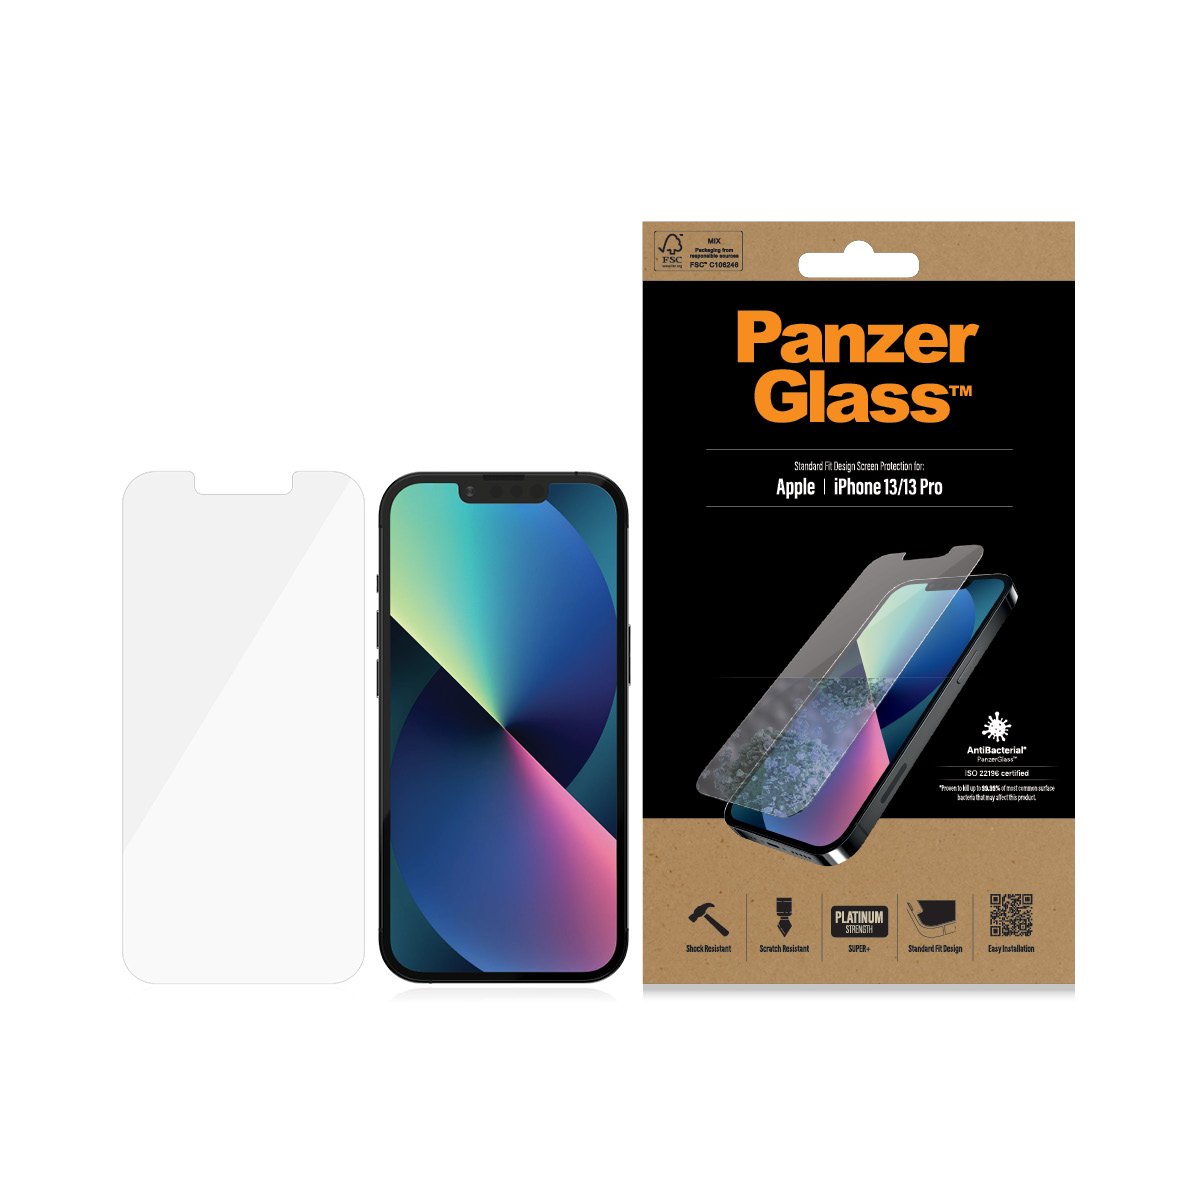 PanzerGlass Anti-Refective Screen Protector for Iphone 13/13 Pro (6.1")